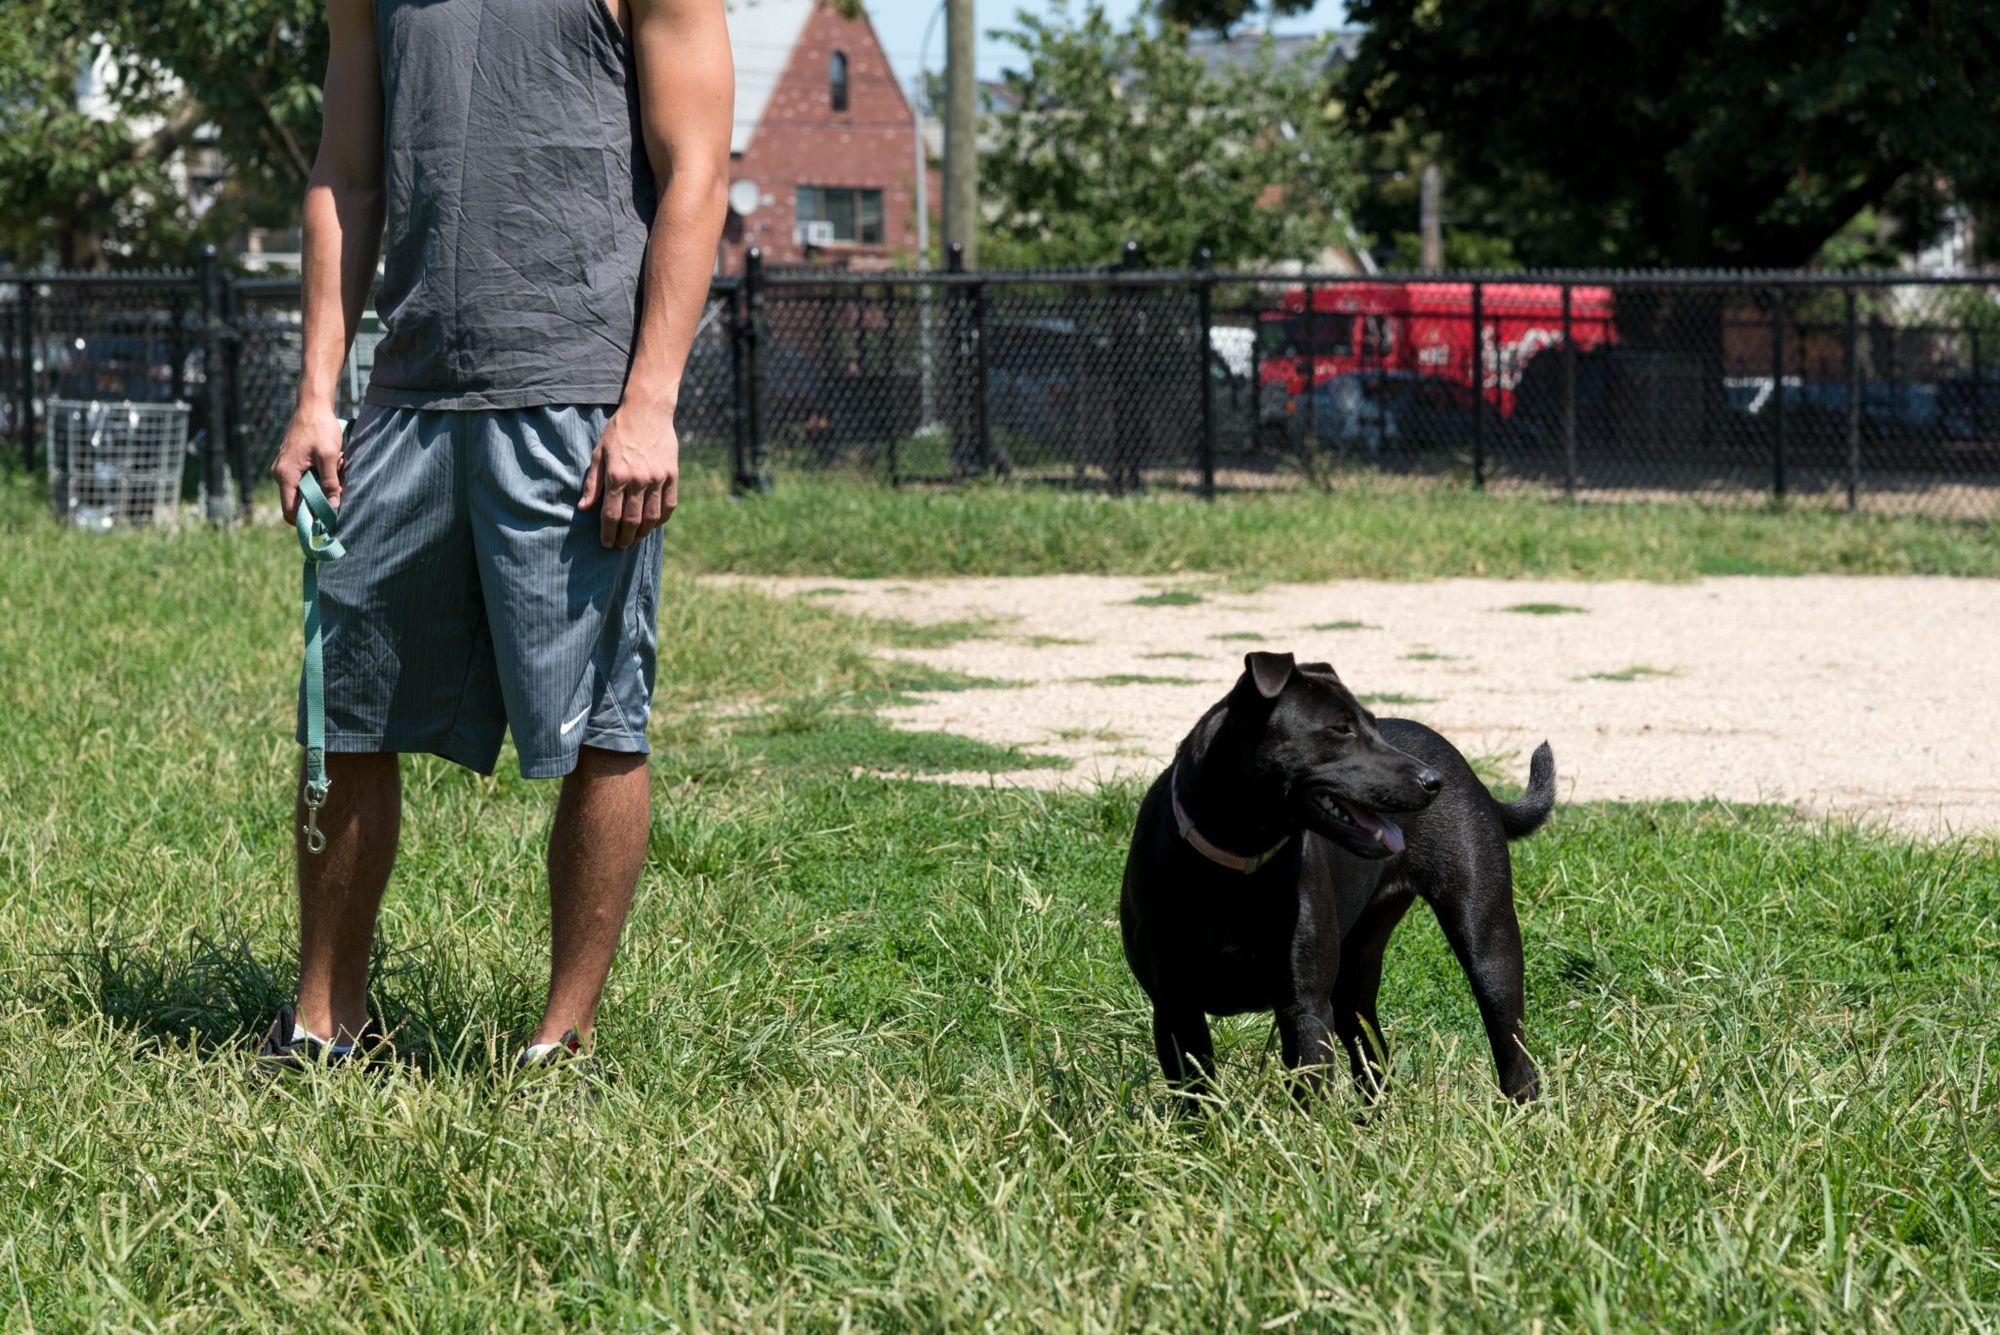 Which Neighborhood Has The Most Barking Dog Complaints?